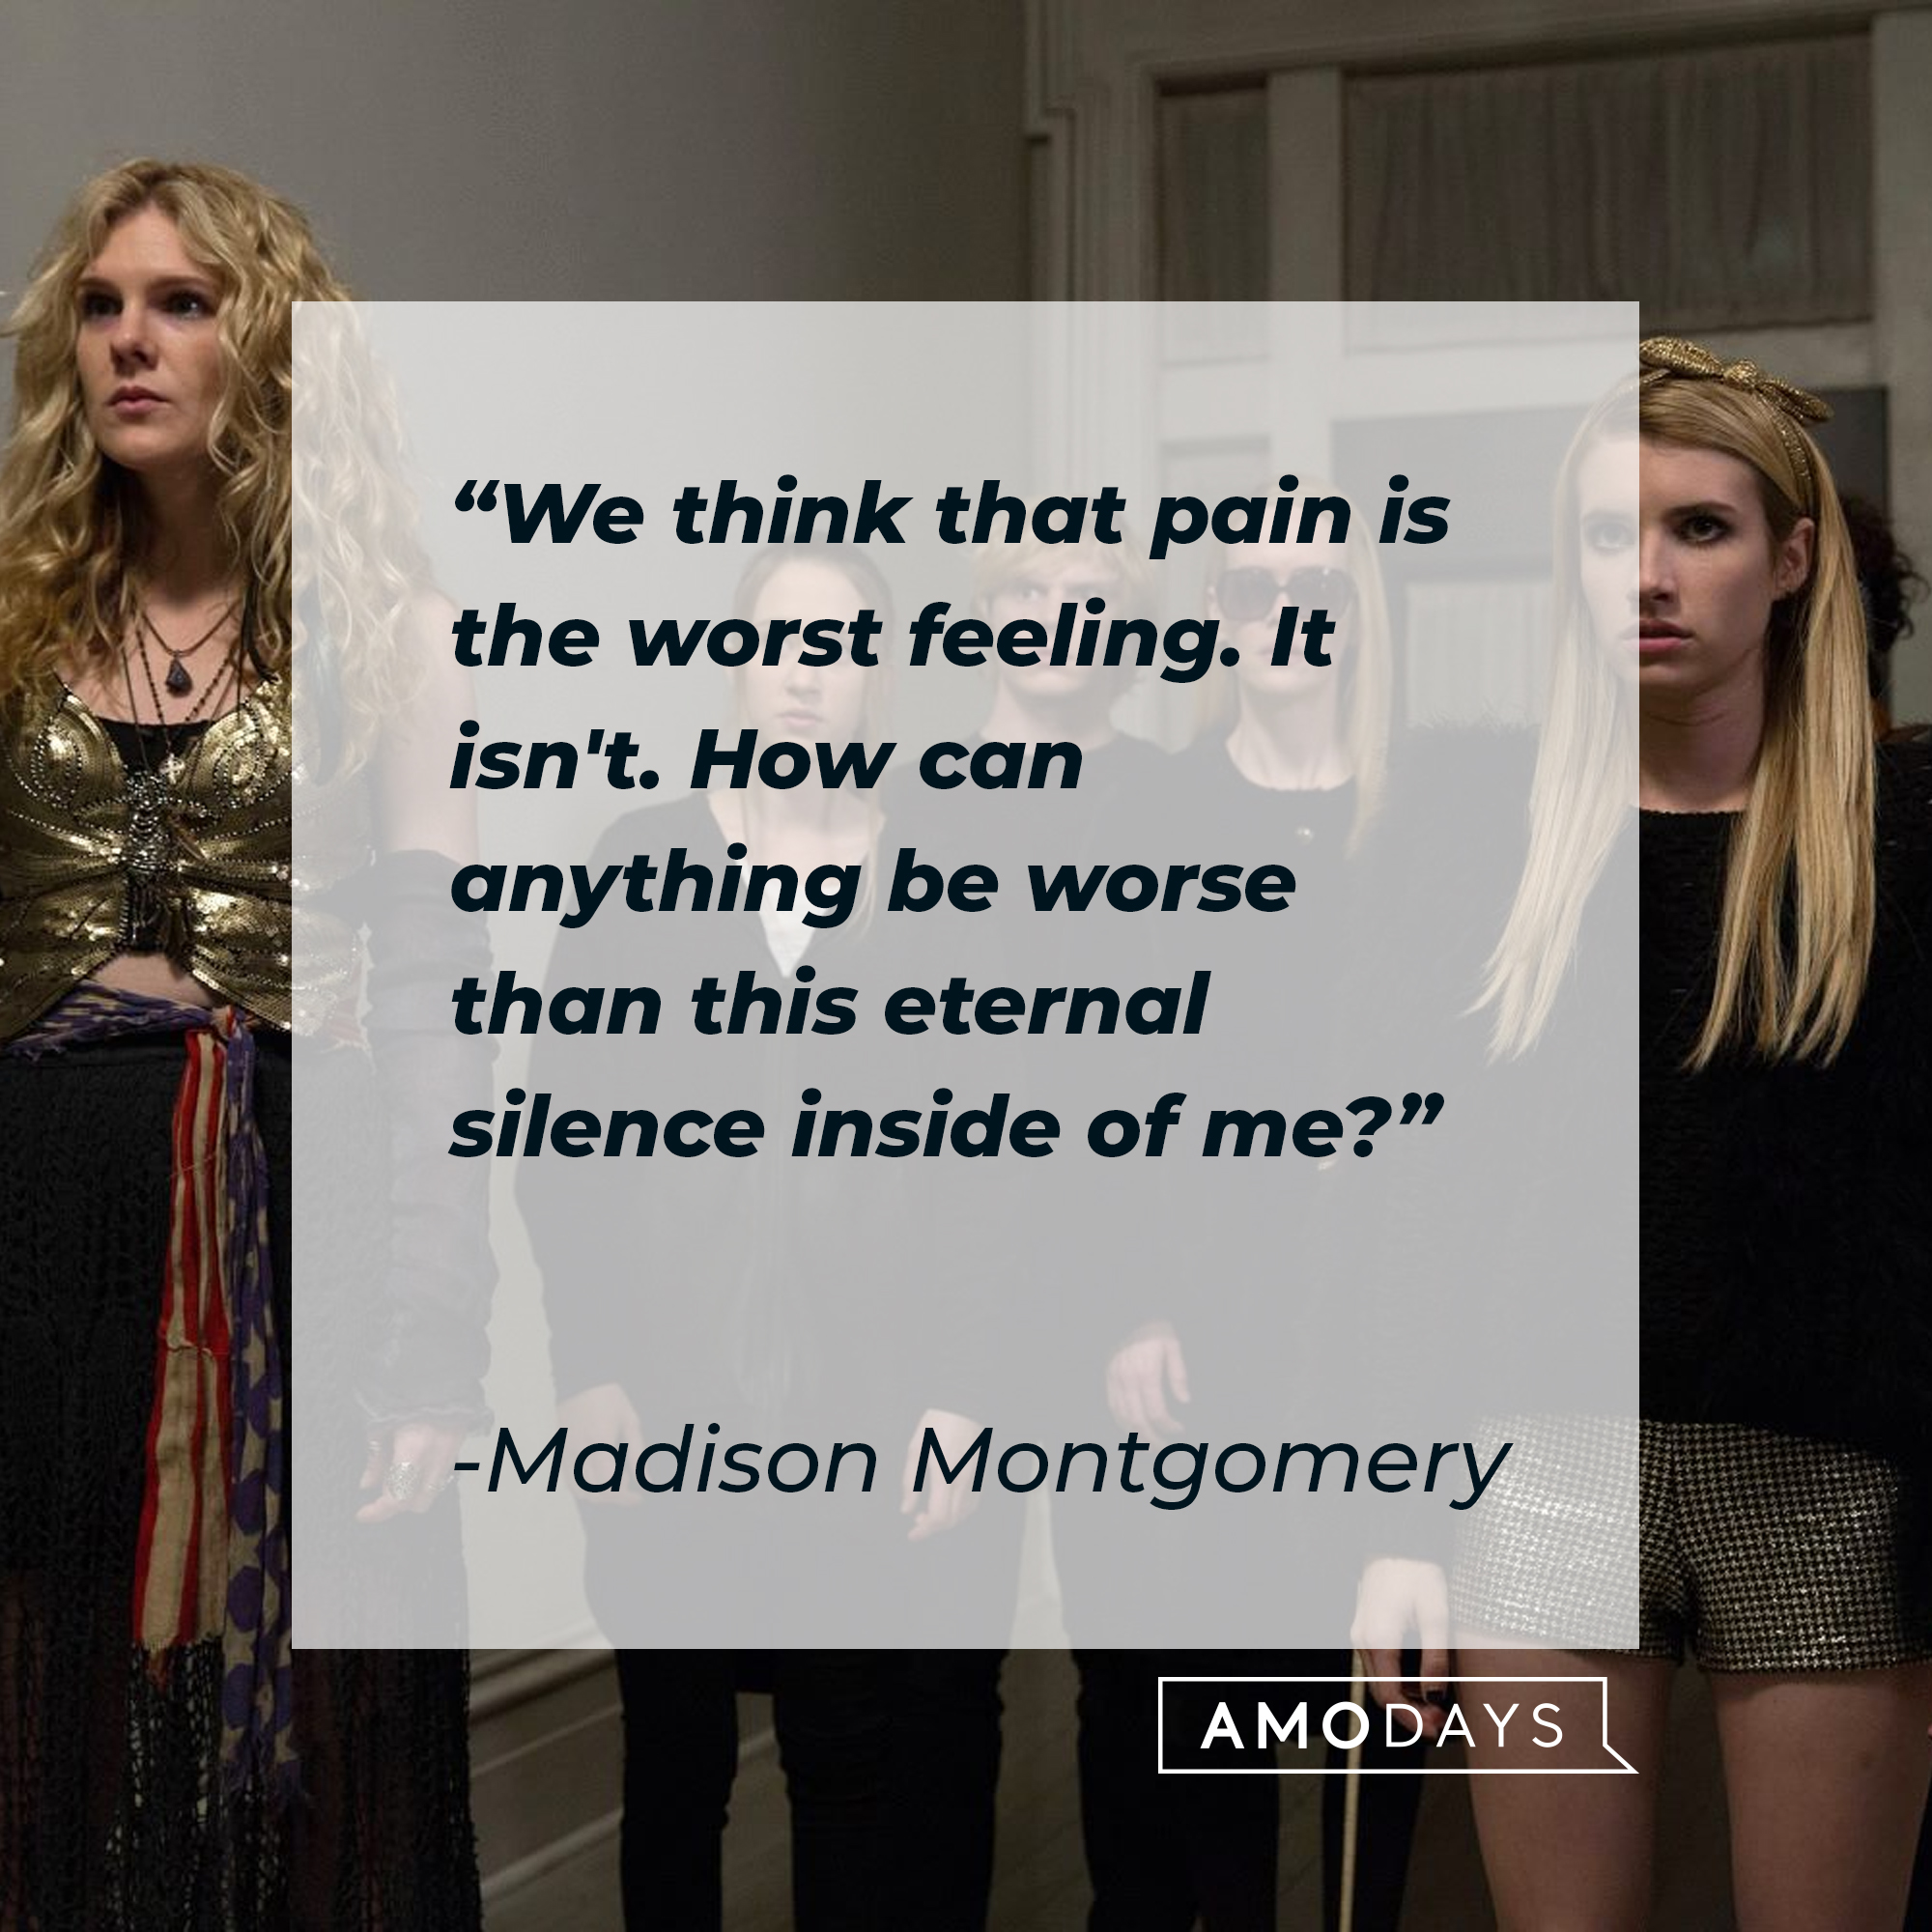 Madison's quote: "We think that pain is the worst feeling. It isn't. How can anything be worse than this eternal silence inside of me?" | Source: facebook.com/americanhorrorstory